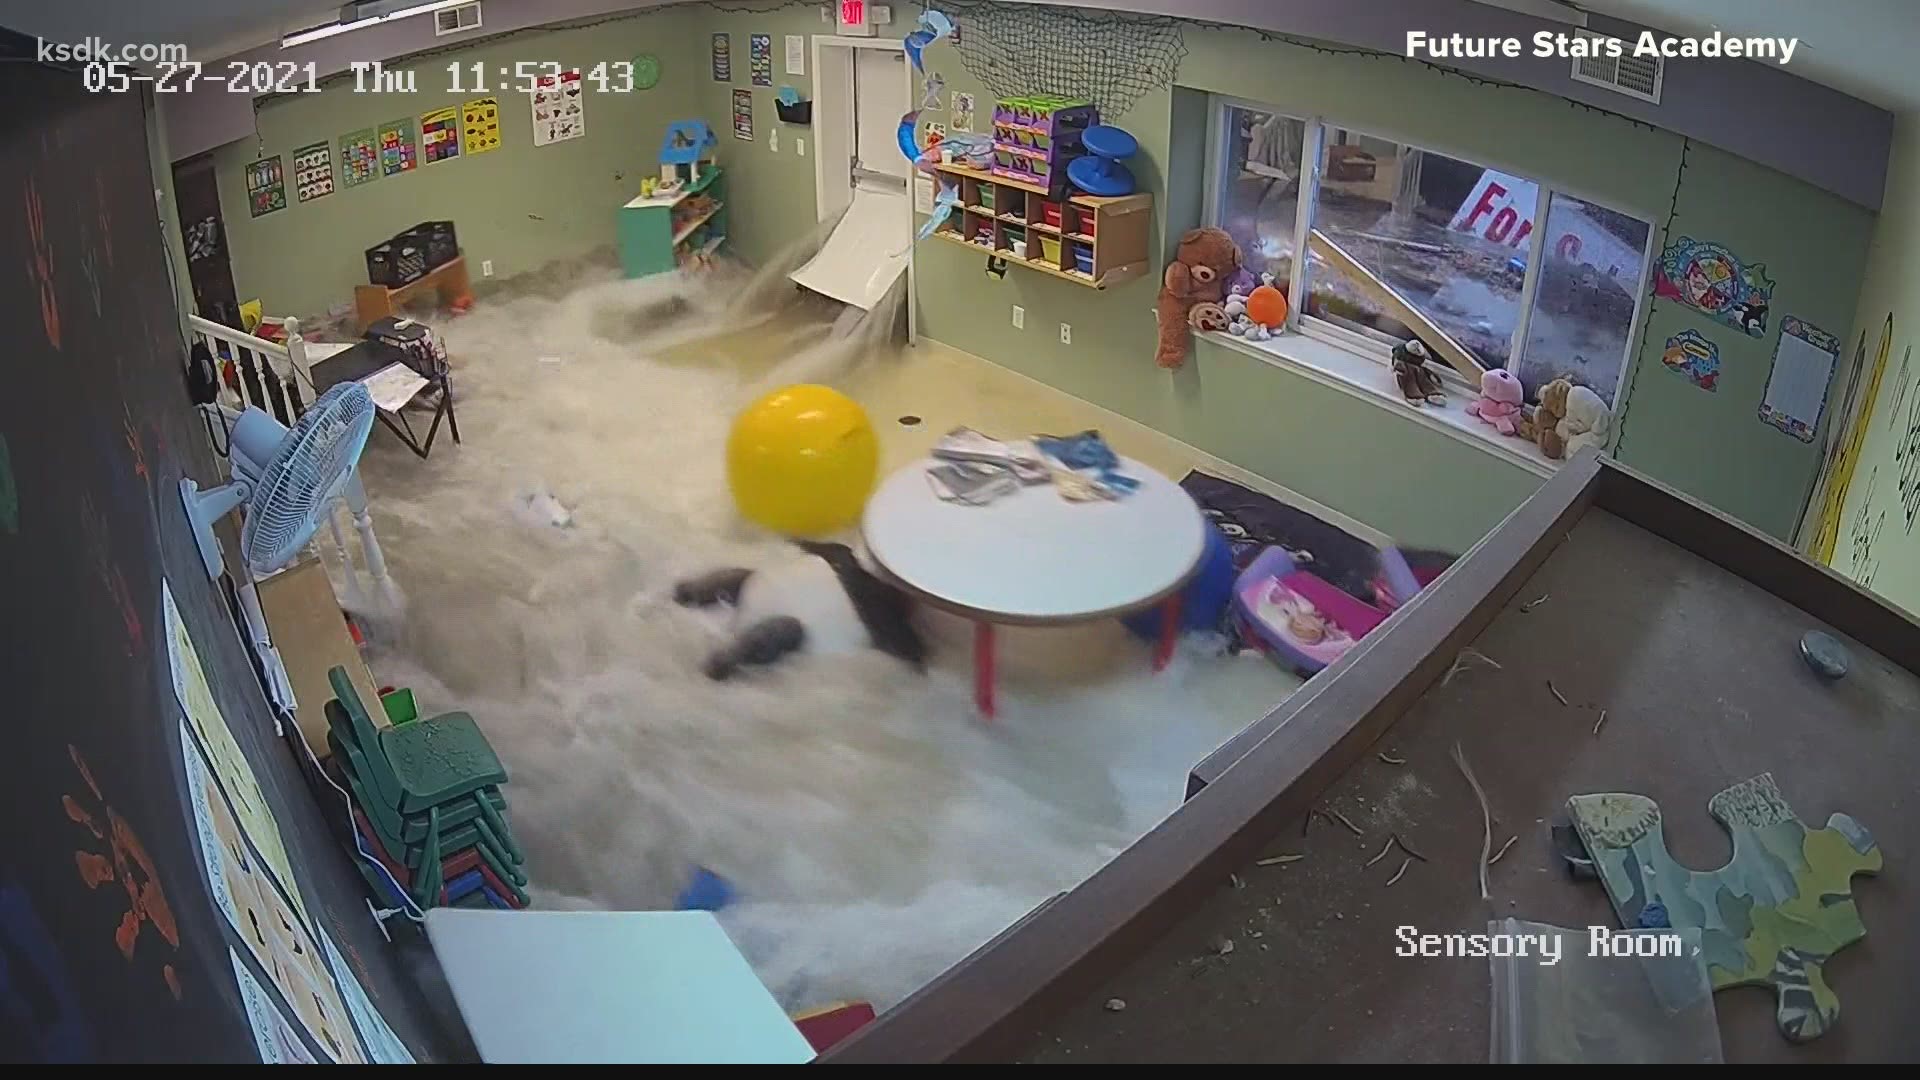 When flooding pushed in a door on May 27, a security video captured how quickly the water rushed into an empty playroom, taking all the furniture and toys with it.